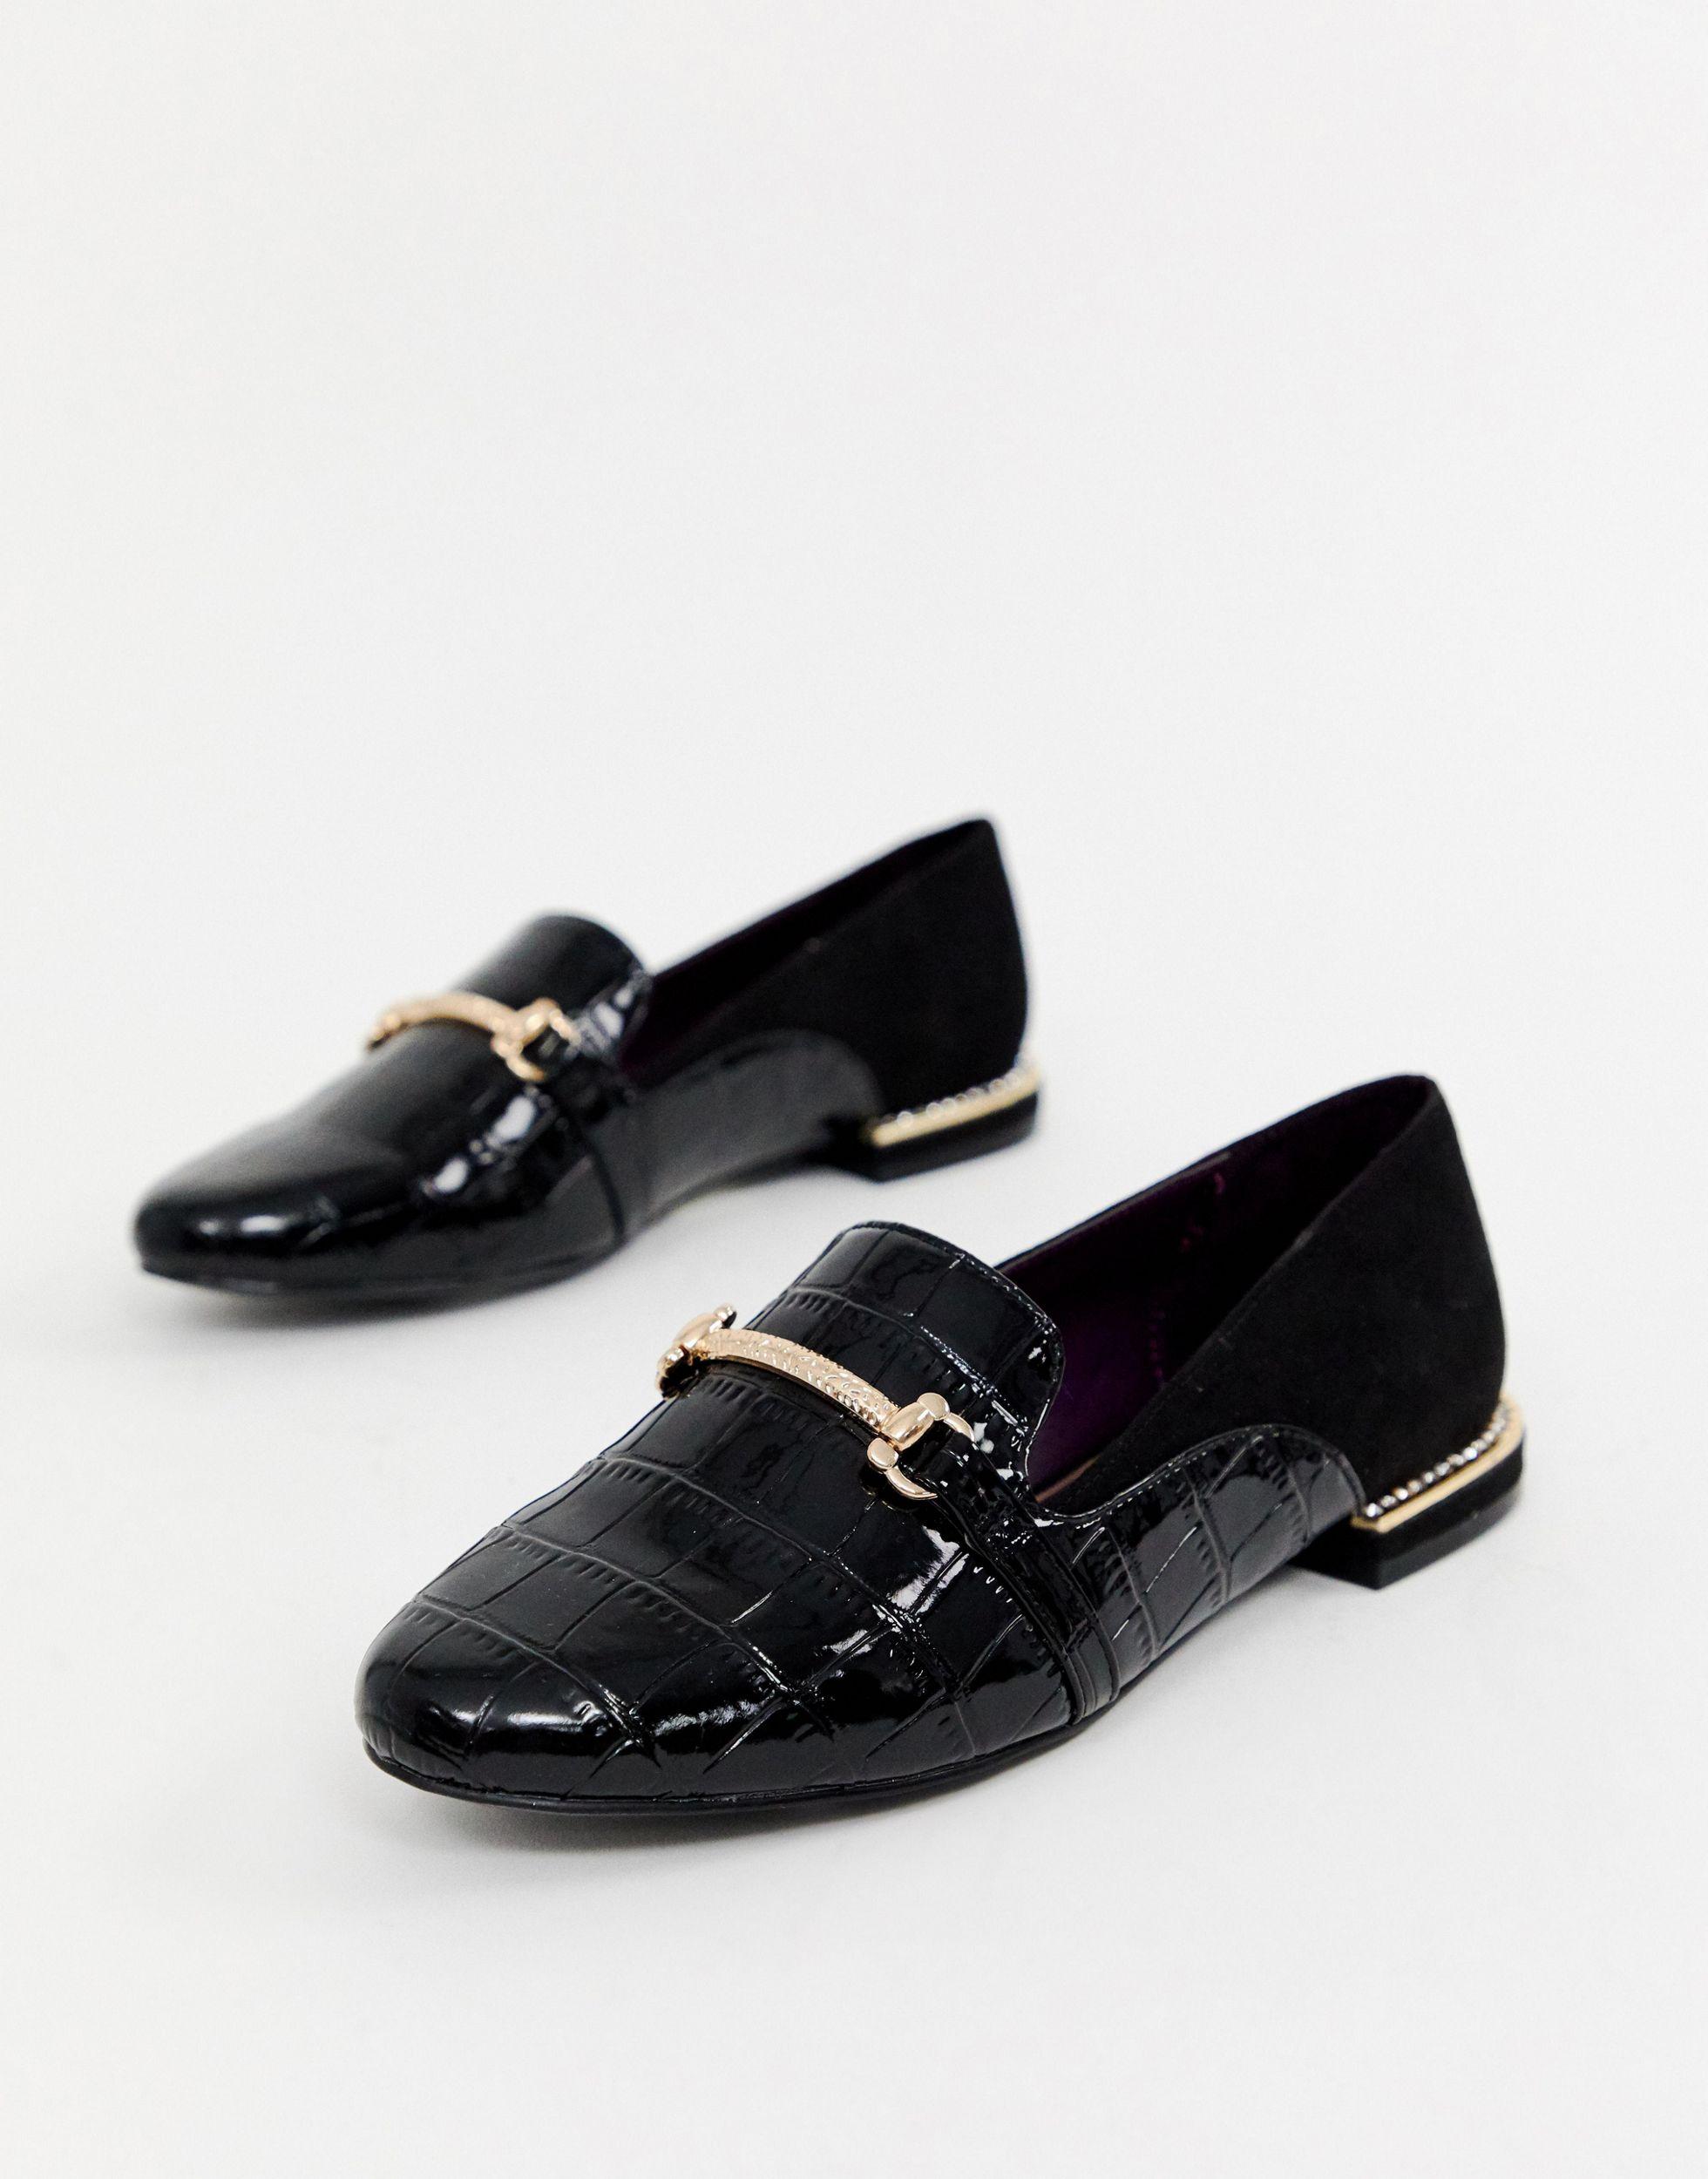 River Island Loafers With Gold Buckle in Black | Lyst